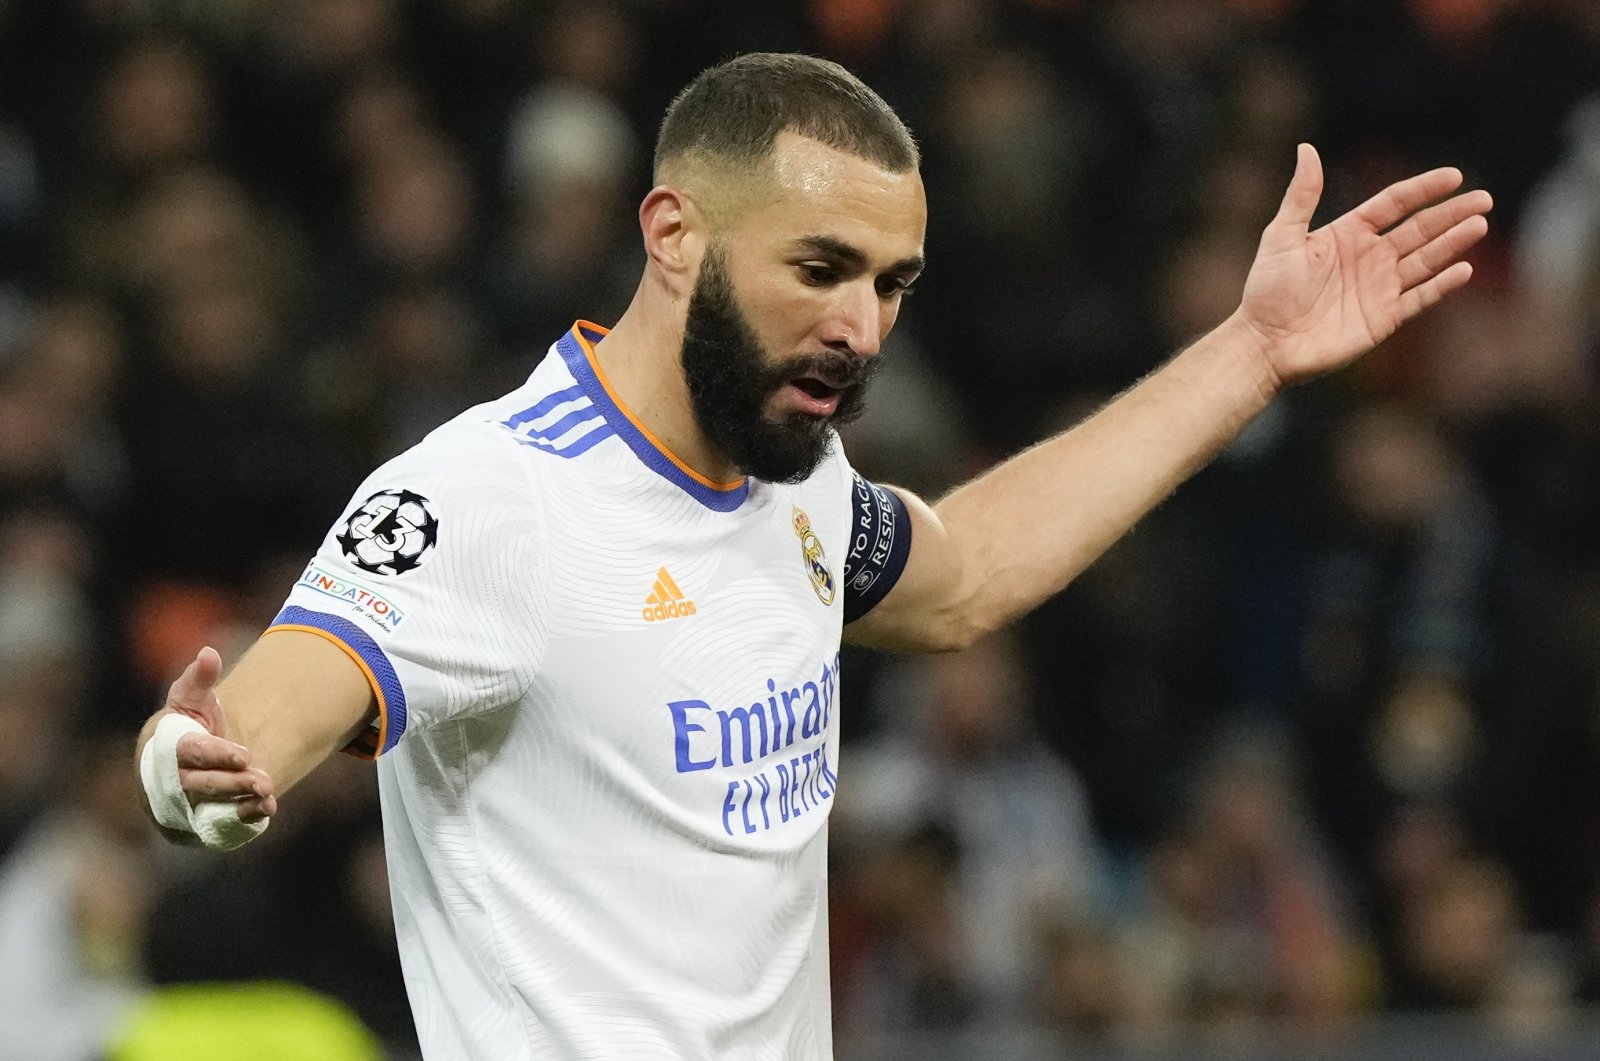 Real Madrid's Karim Benzema reacts during a Champions League match at the Olympiyskiy stadium in Kyiv, Ukraine, Oct. 19, 2021. (AP Photo)